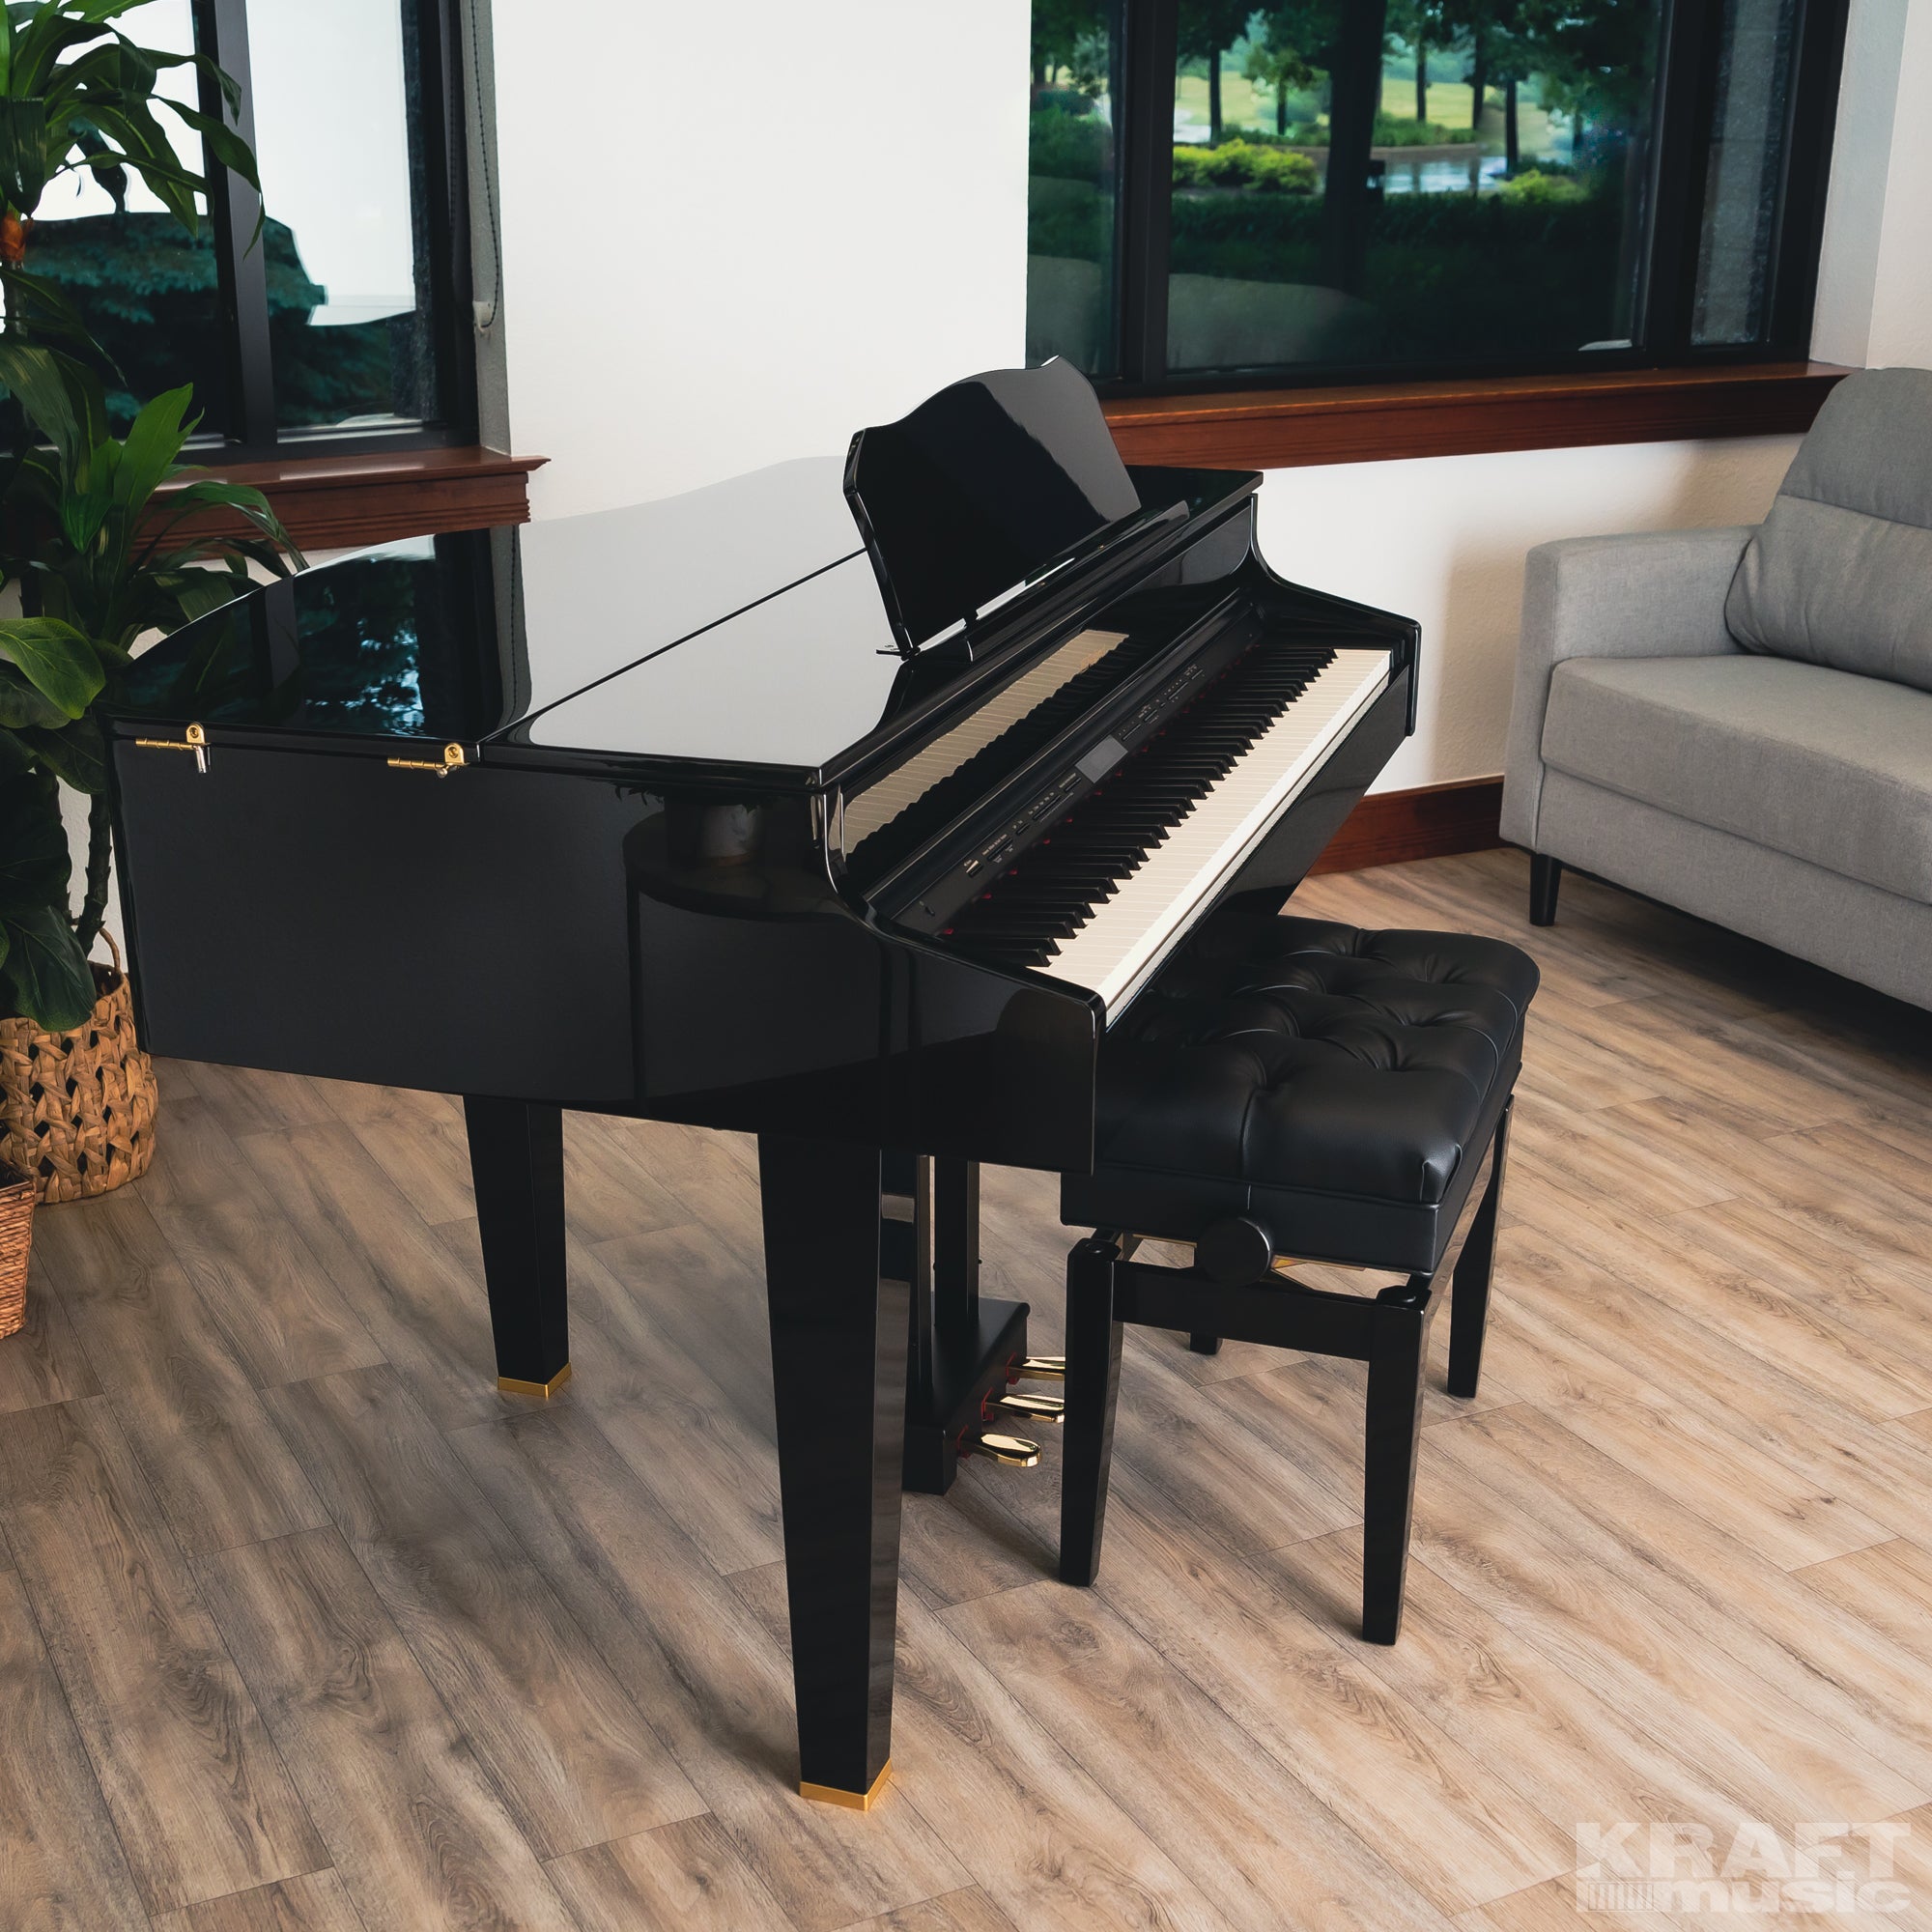 Roland GP607 Digital Grand Piano - Polished Ebony - right angle with lid closed in a stylish music room